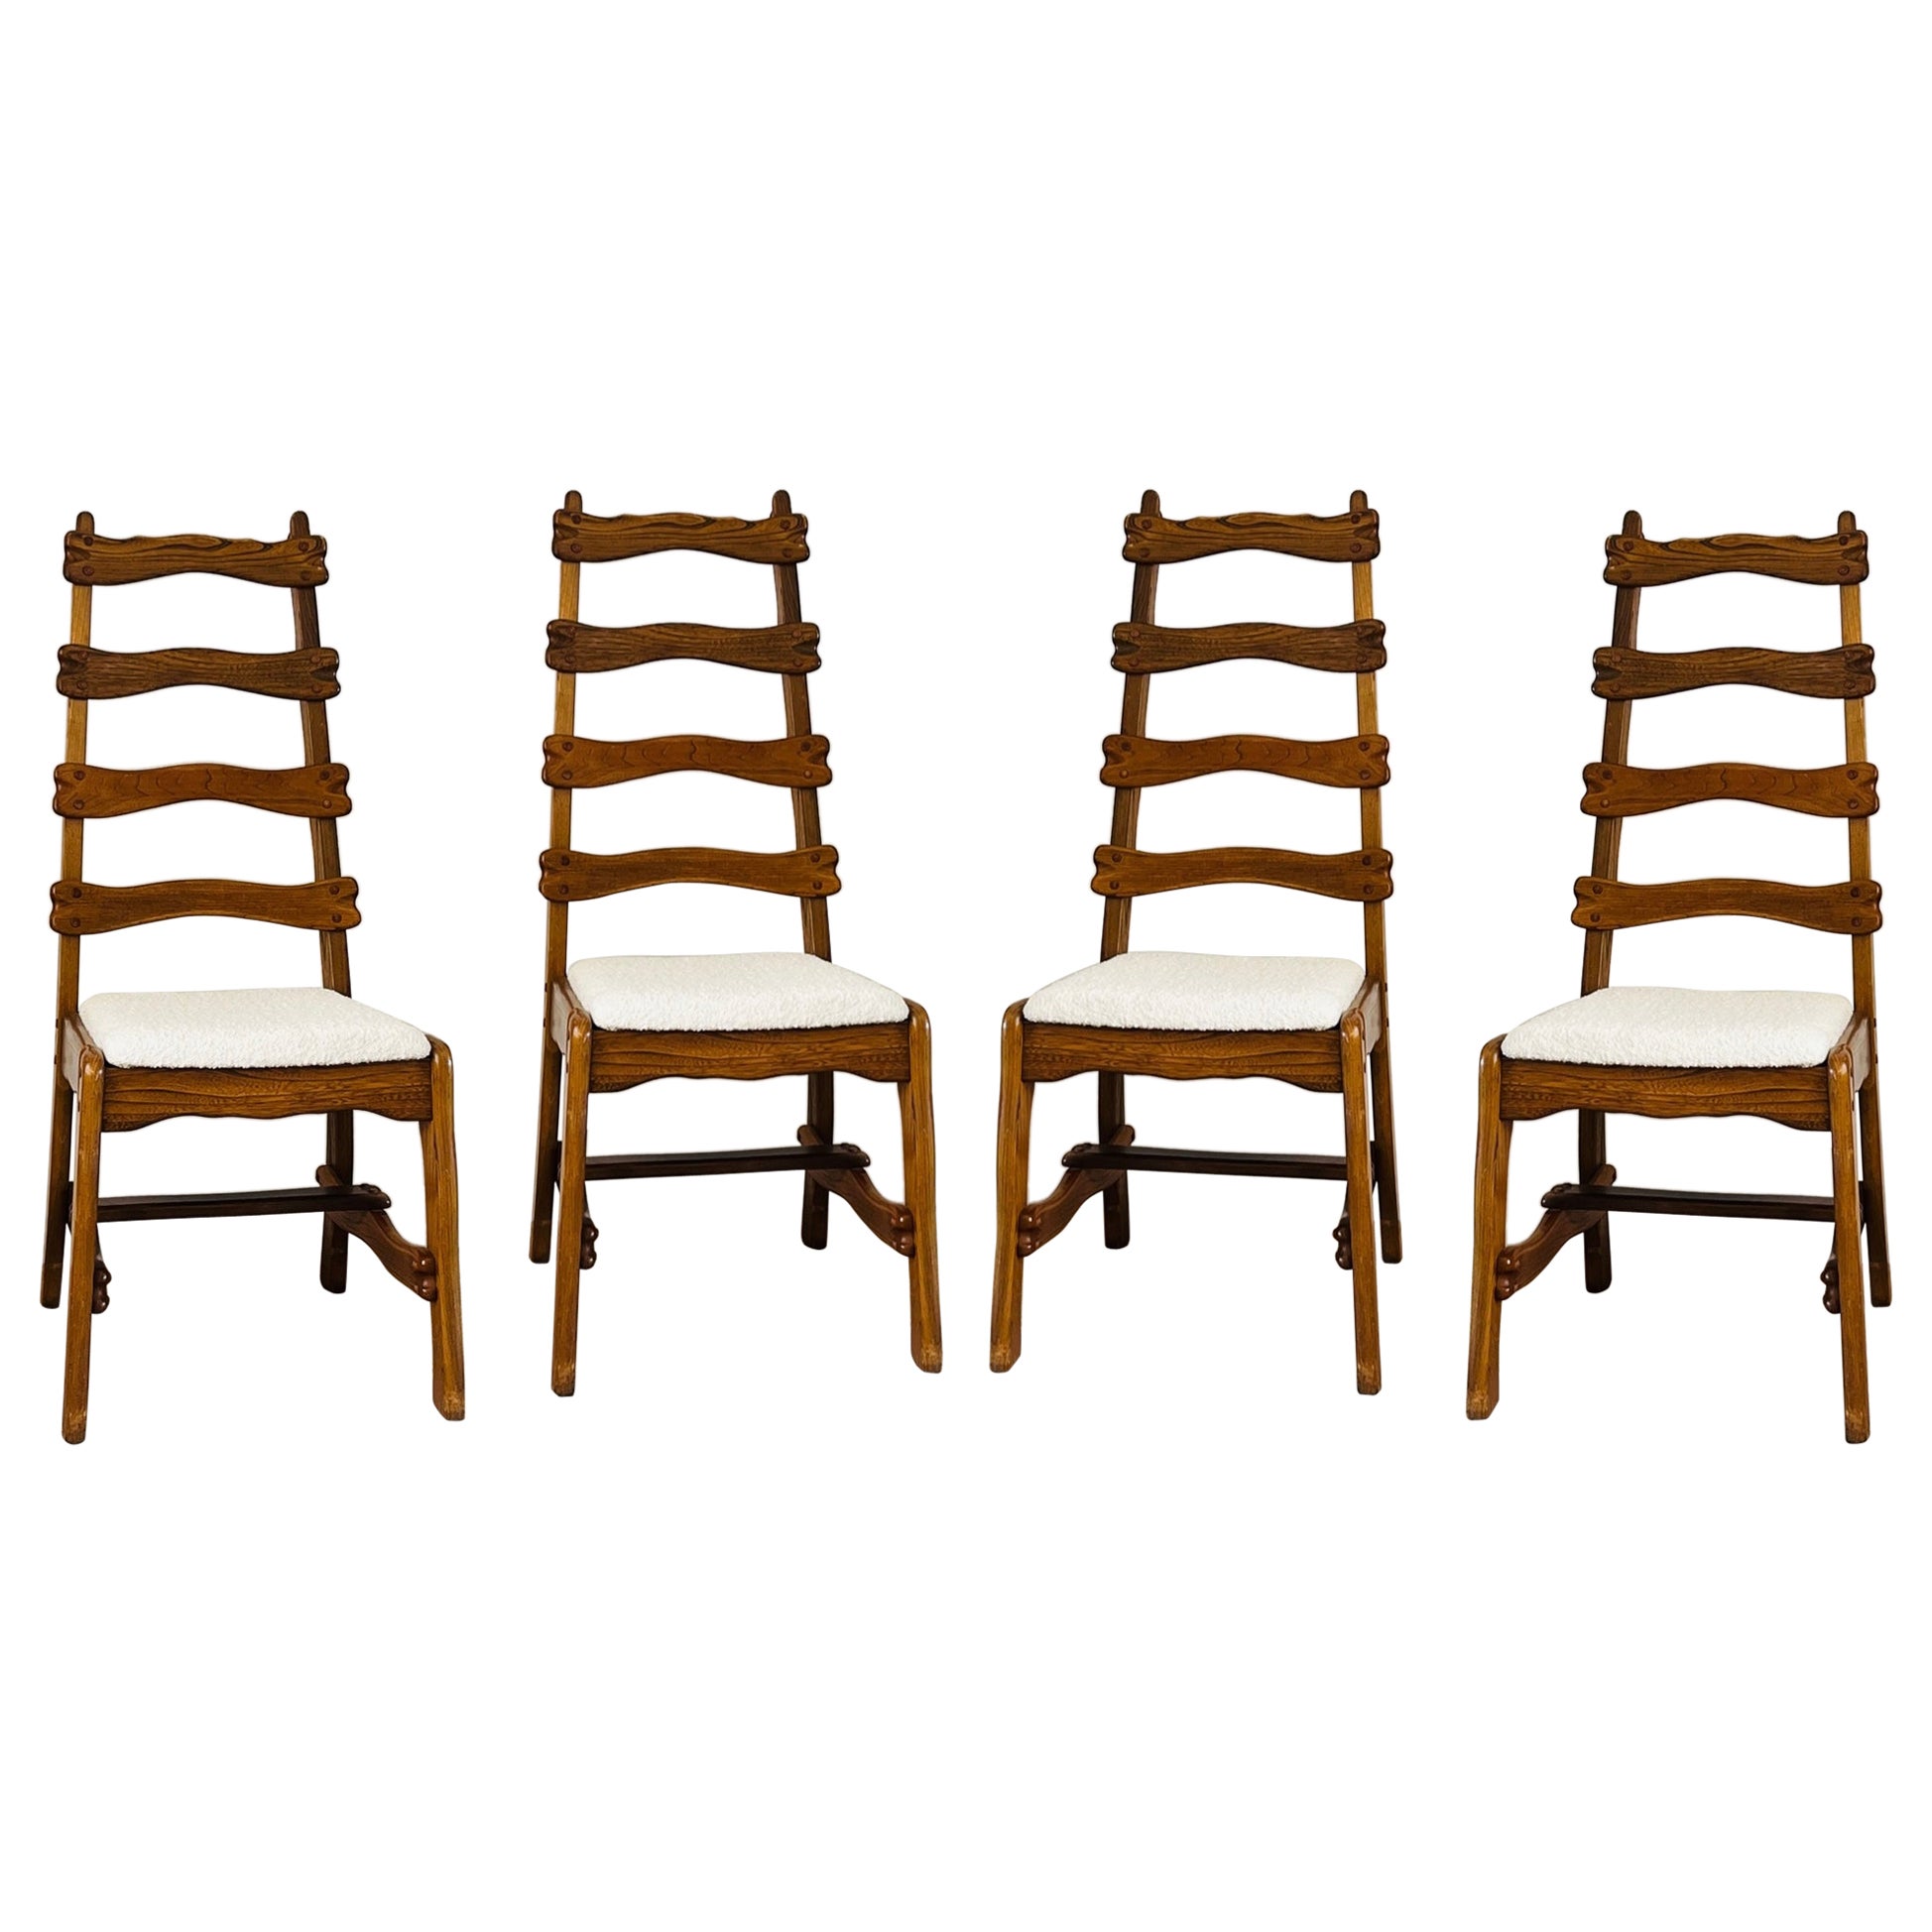 Set of 4 Sculptural Carved Oak Chairs in Cream Bouclé